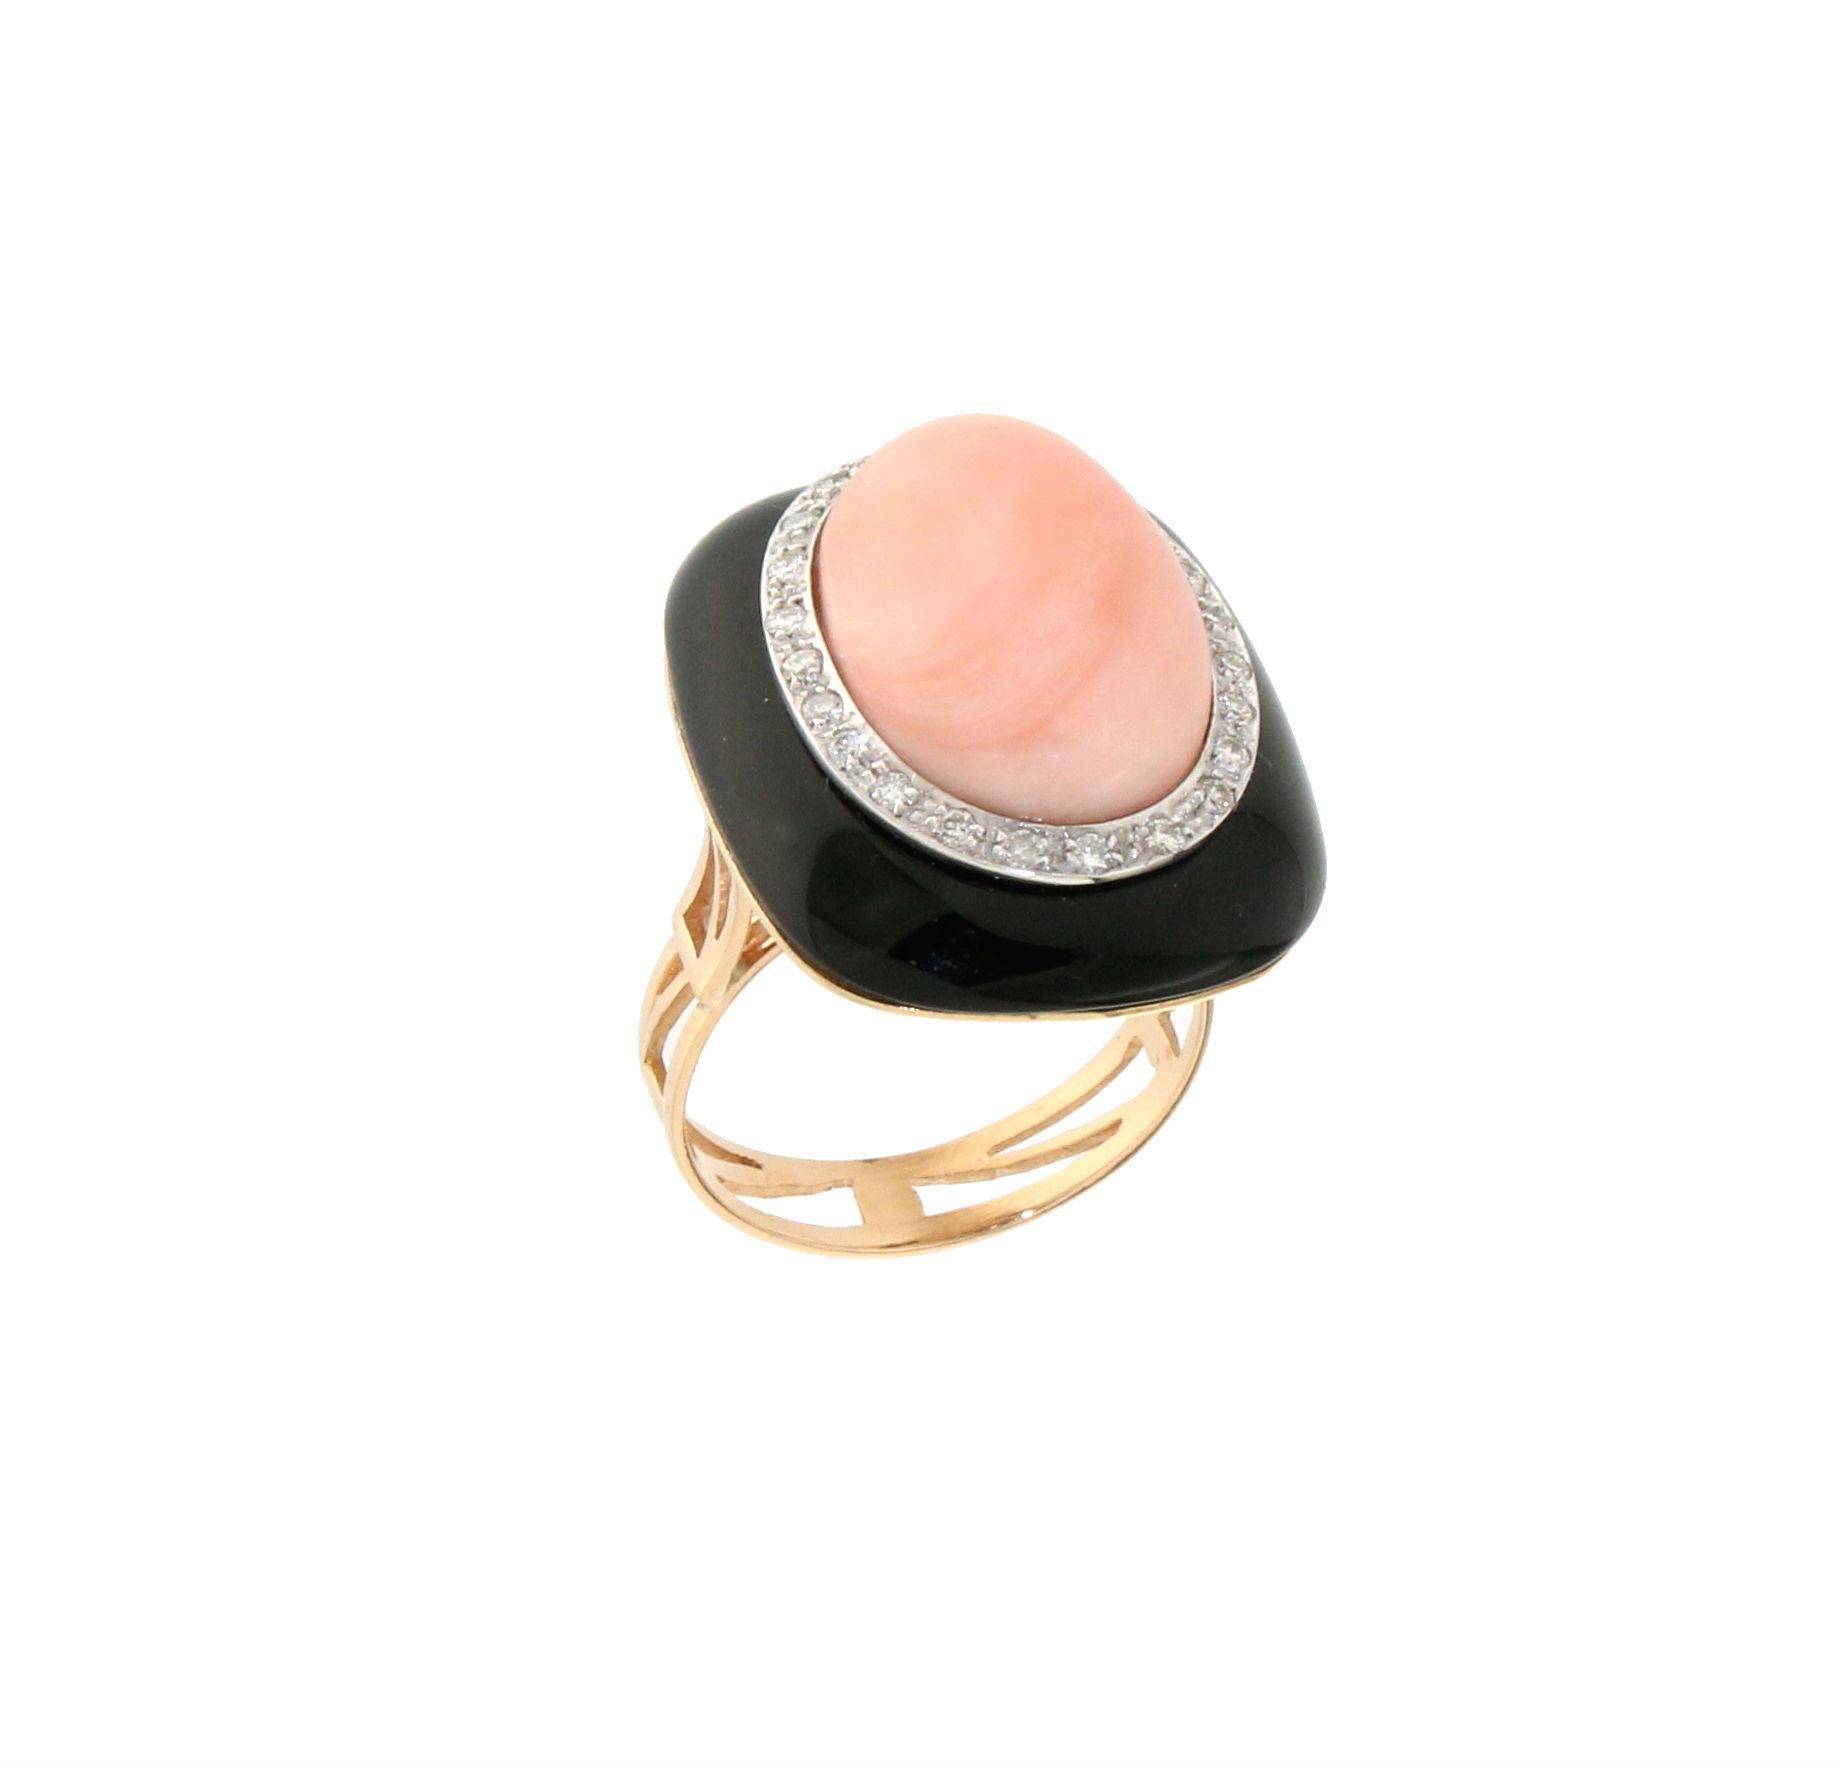 Brilliant Cut Handcraft Coral 18 Karat Yellow and White Gold Onyx Diamonds Cocktail Ring